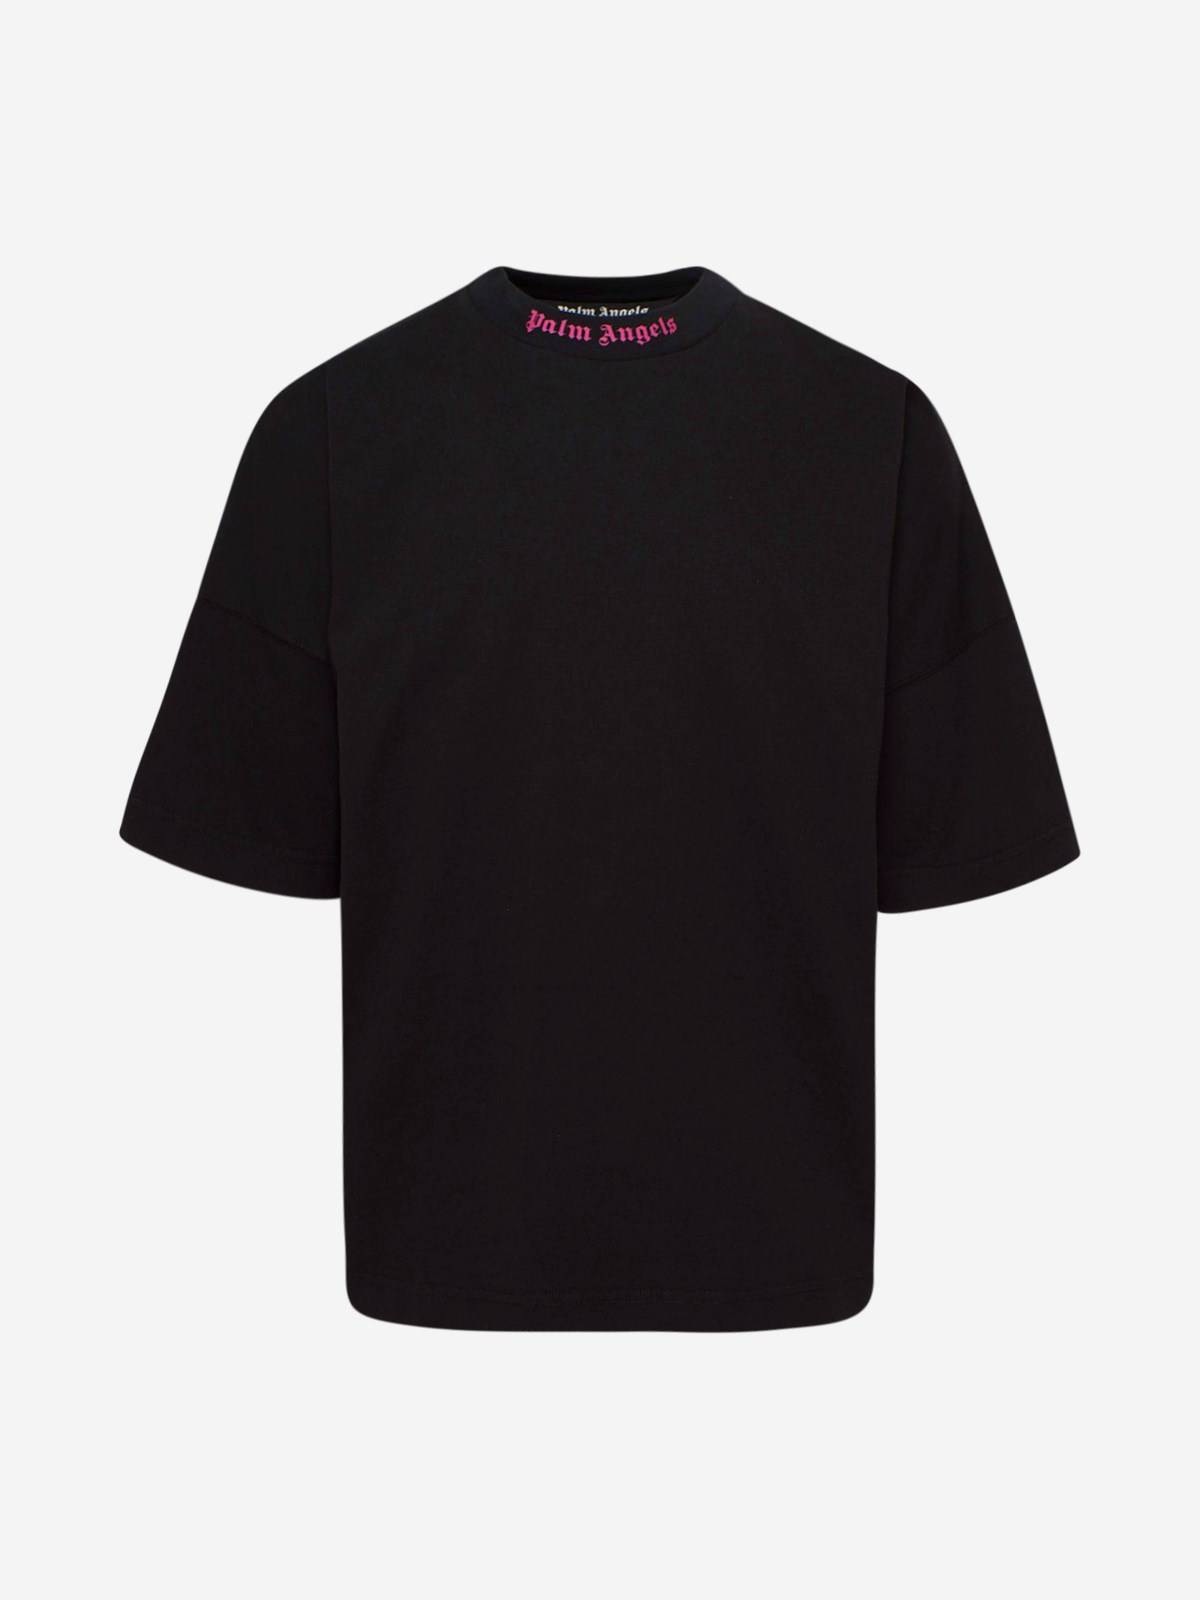 PALM ANGELS T-SHIRT DOUBLED LOGO OVER NERA